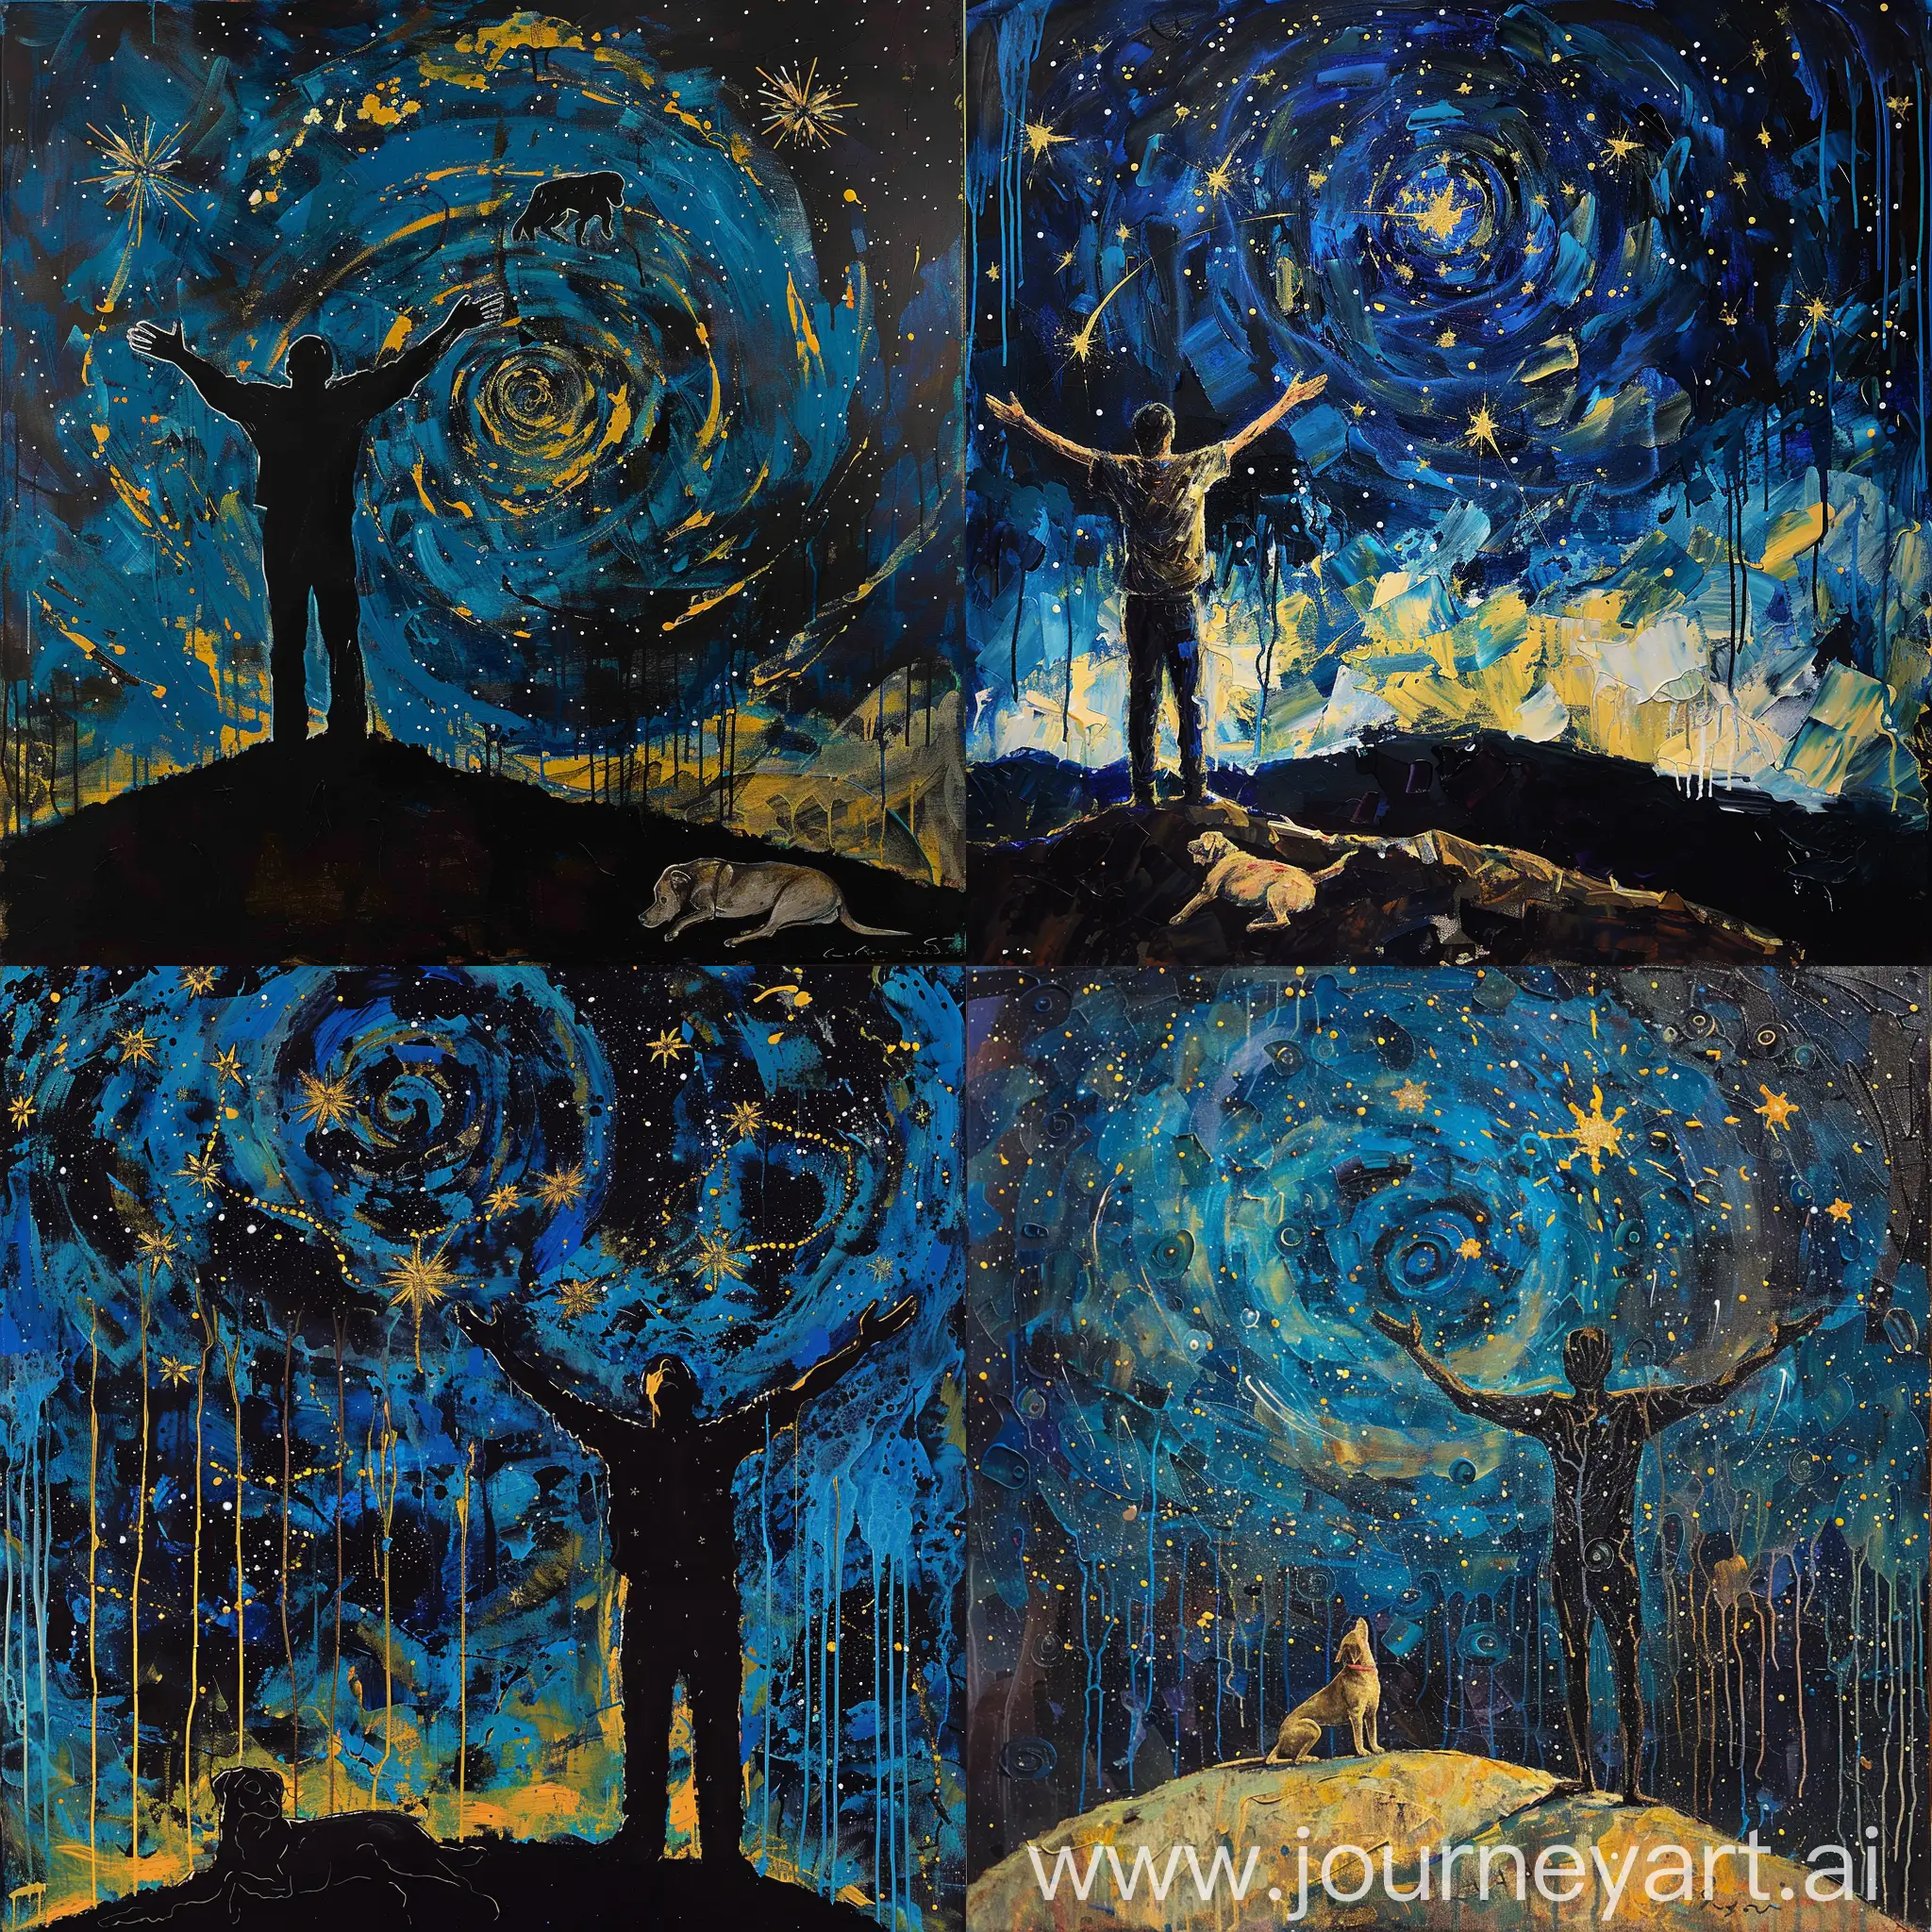 abstract expressionist painting of a man reaching for the stars, standing atop a hill with arms outstretched, in the style of Jackson Pollock, night sky with dripping paint and swirling cosmic patterns, sense of vast universe connection, color palette blue black yellow, with a dog lying on the ground beside him